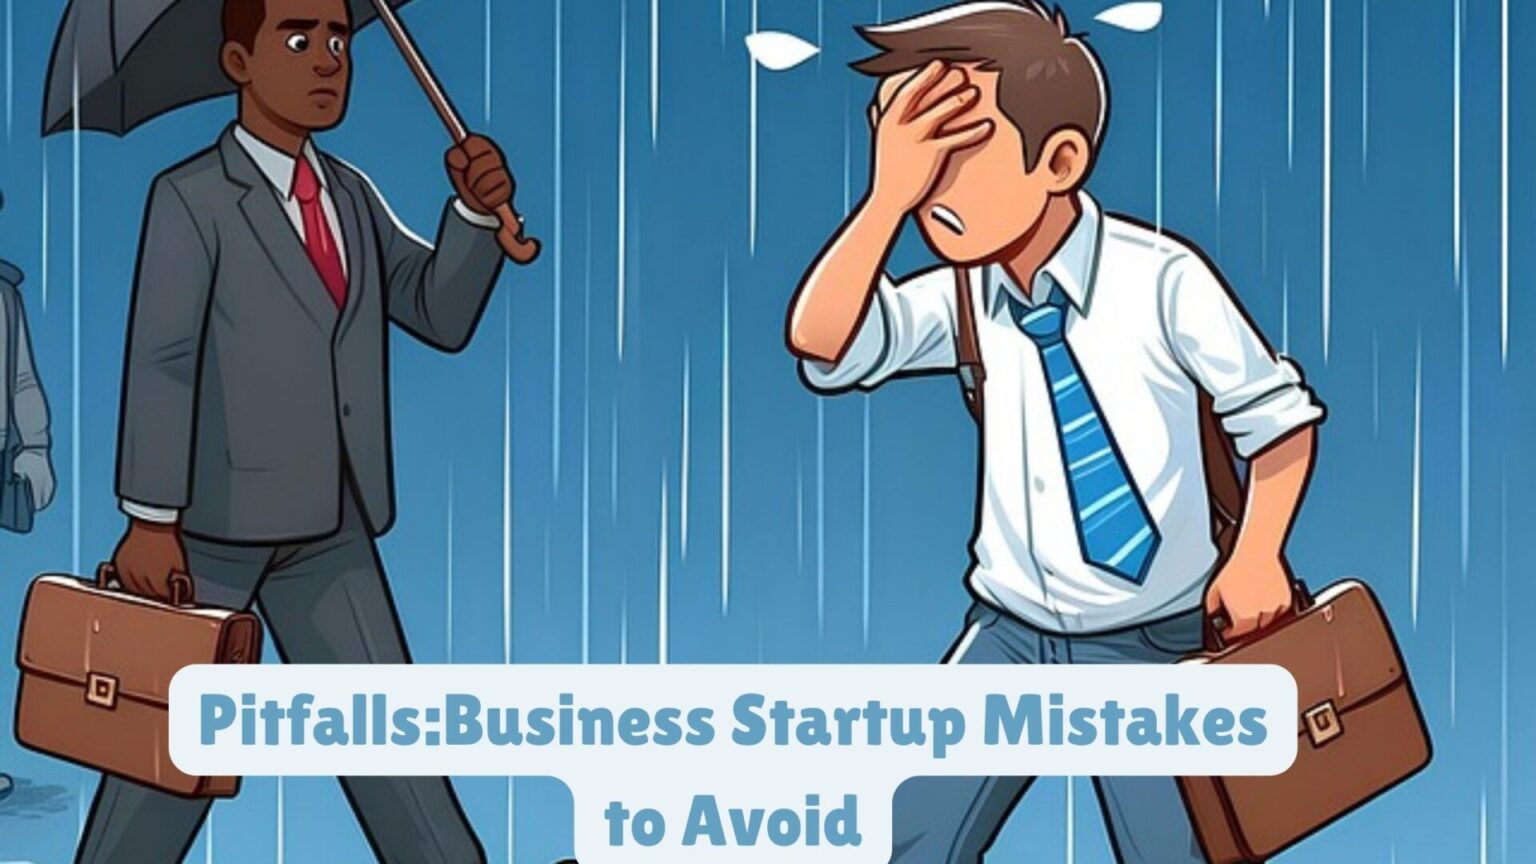 Pitfalls:Business Startup Mistakes to Avoid